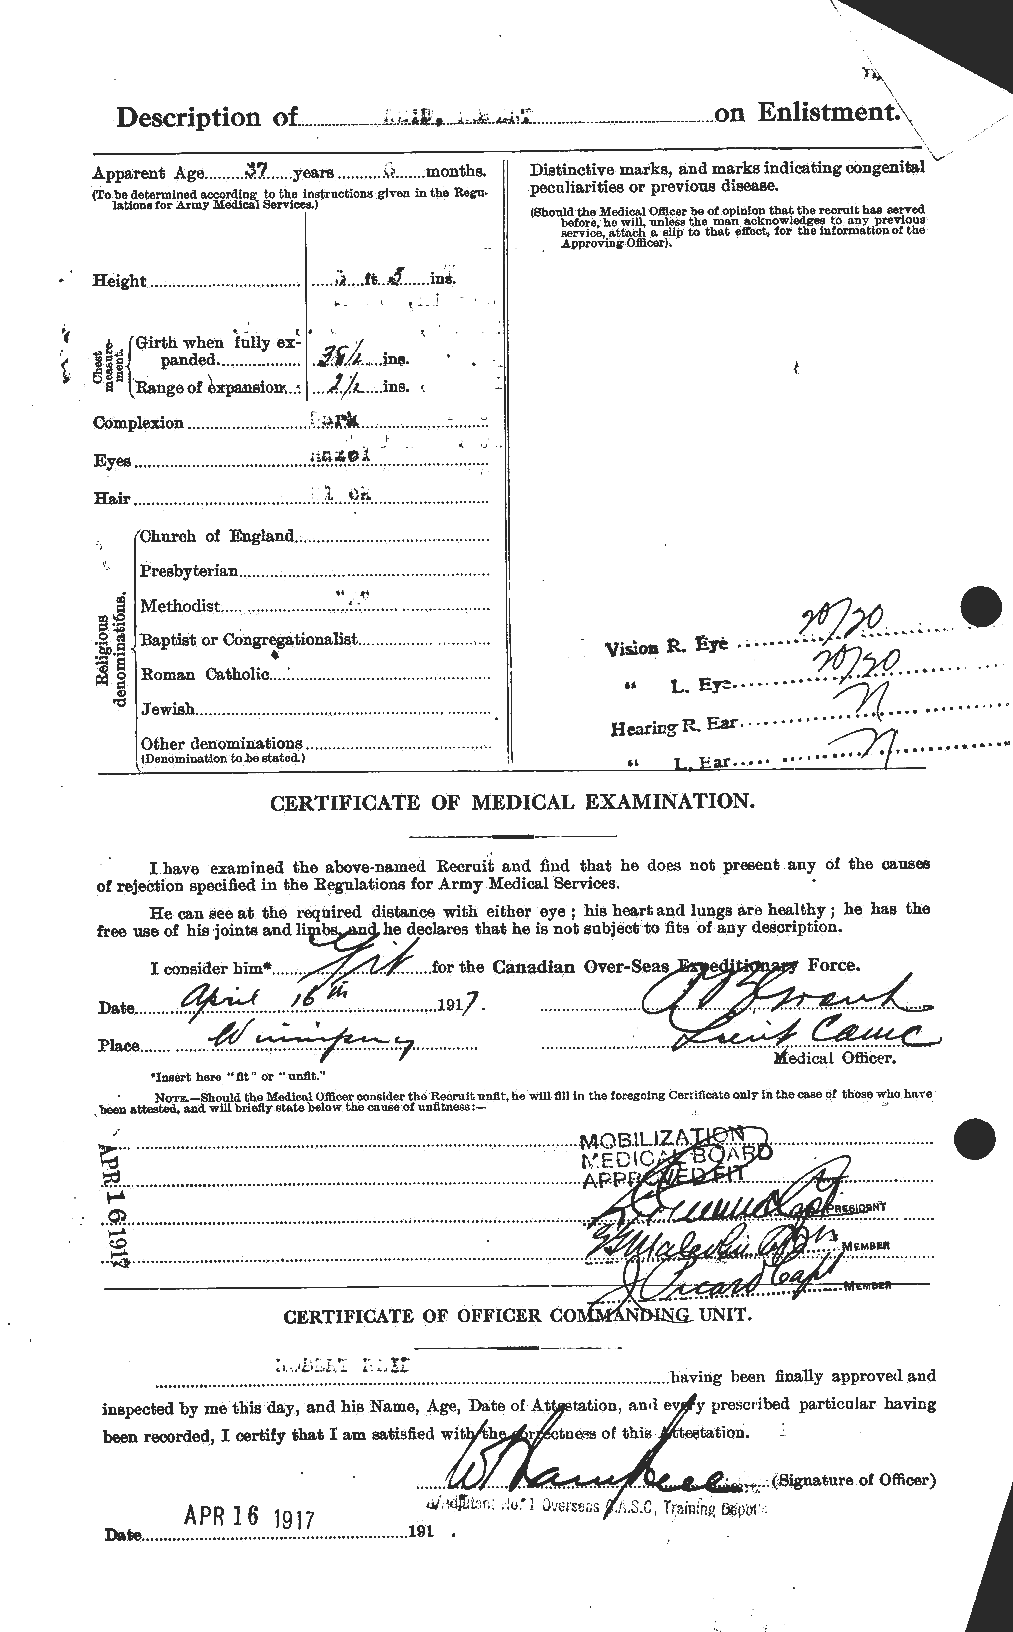 Personnel Records of the First World War - CEF 601878b